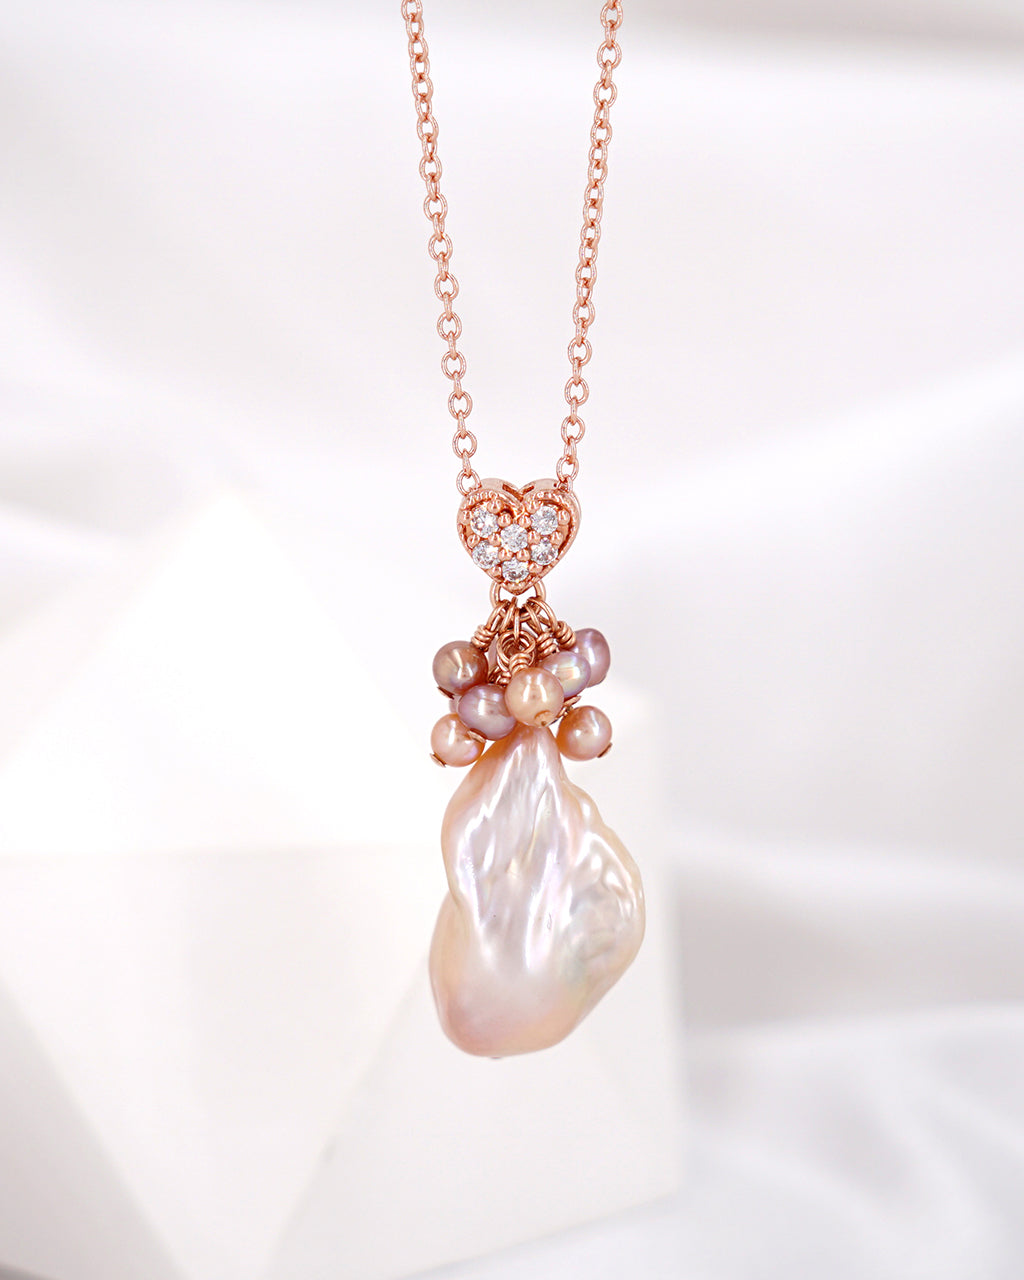 Love Cluster x Light Pink Baroque Pearl Necklace - Wedding Bridal Jewelry for Brides and Bridesmaids | Singapore